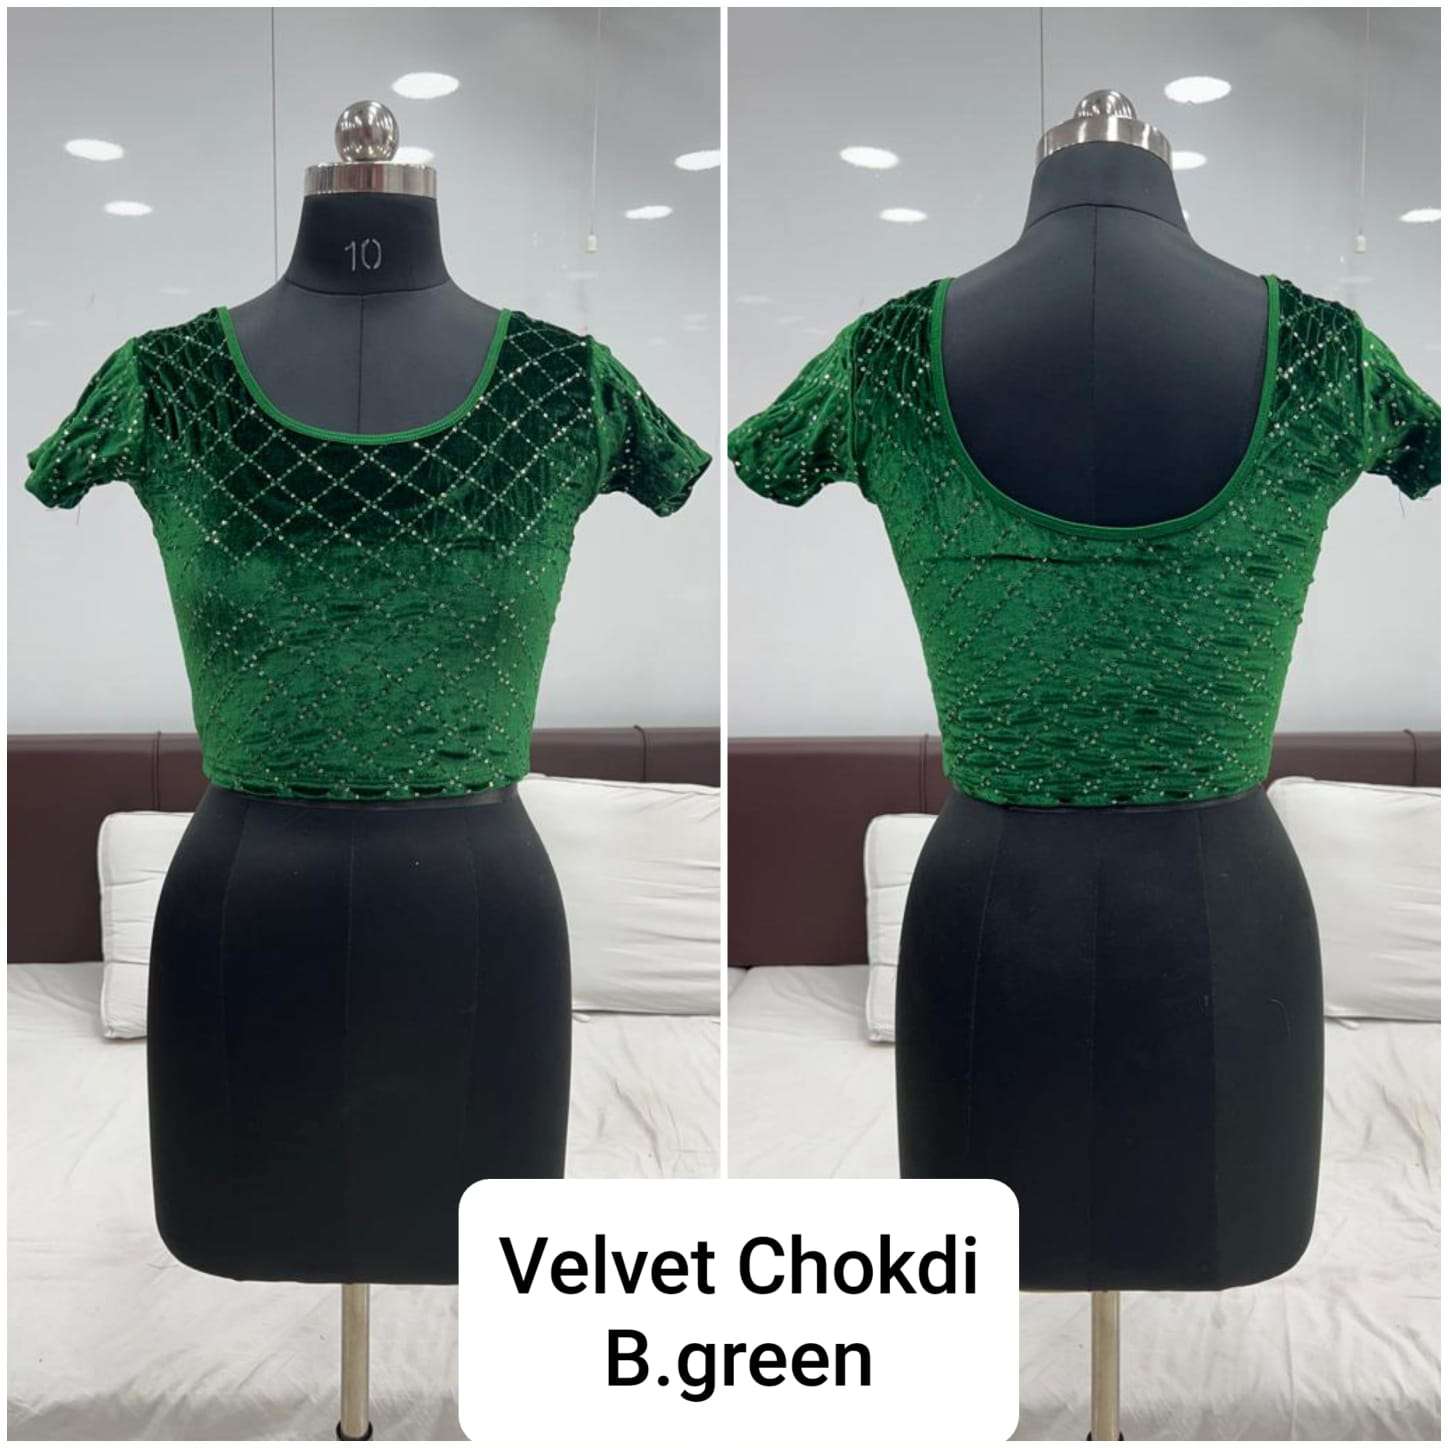 LEHERIA SEQUENCE STRETCHABLE BLOUSE LATEST READYMADE BLOUSE ...